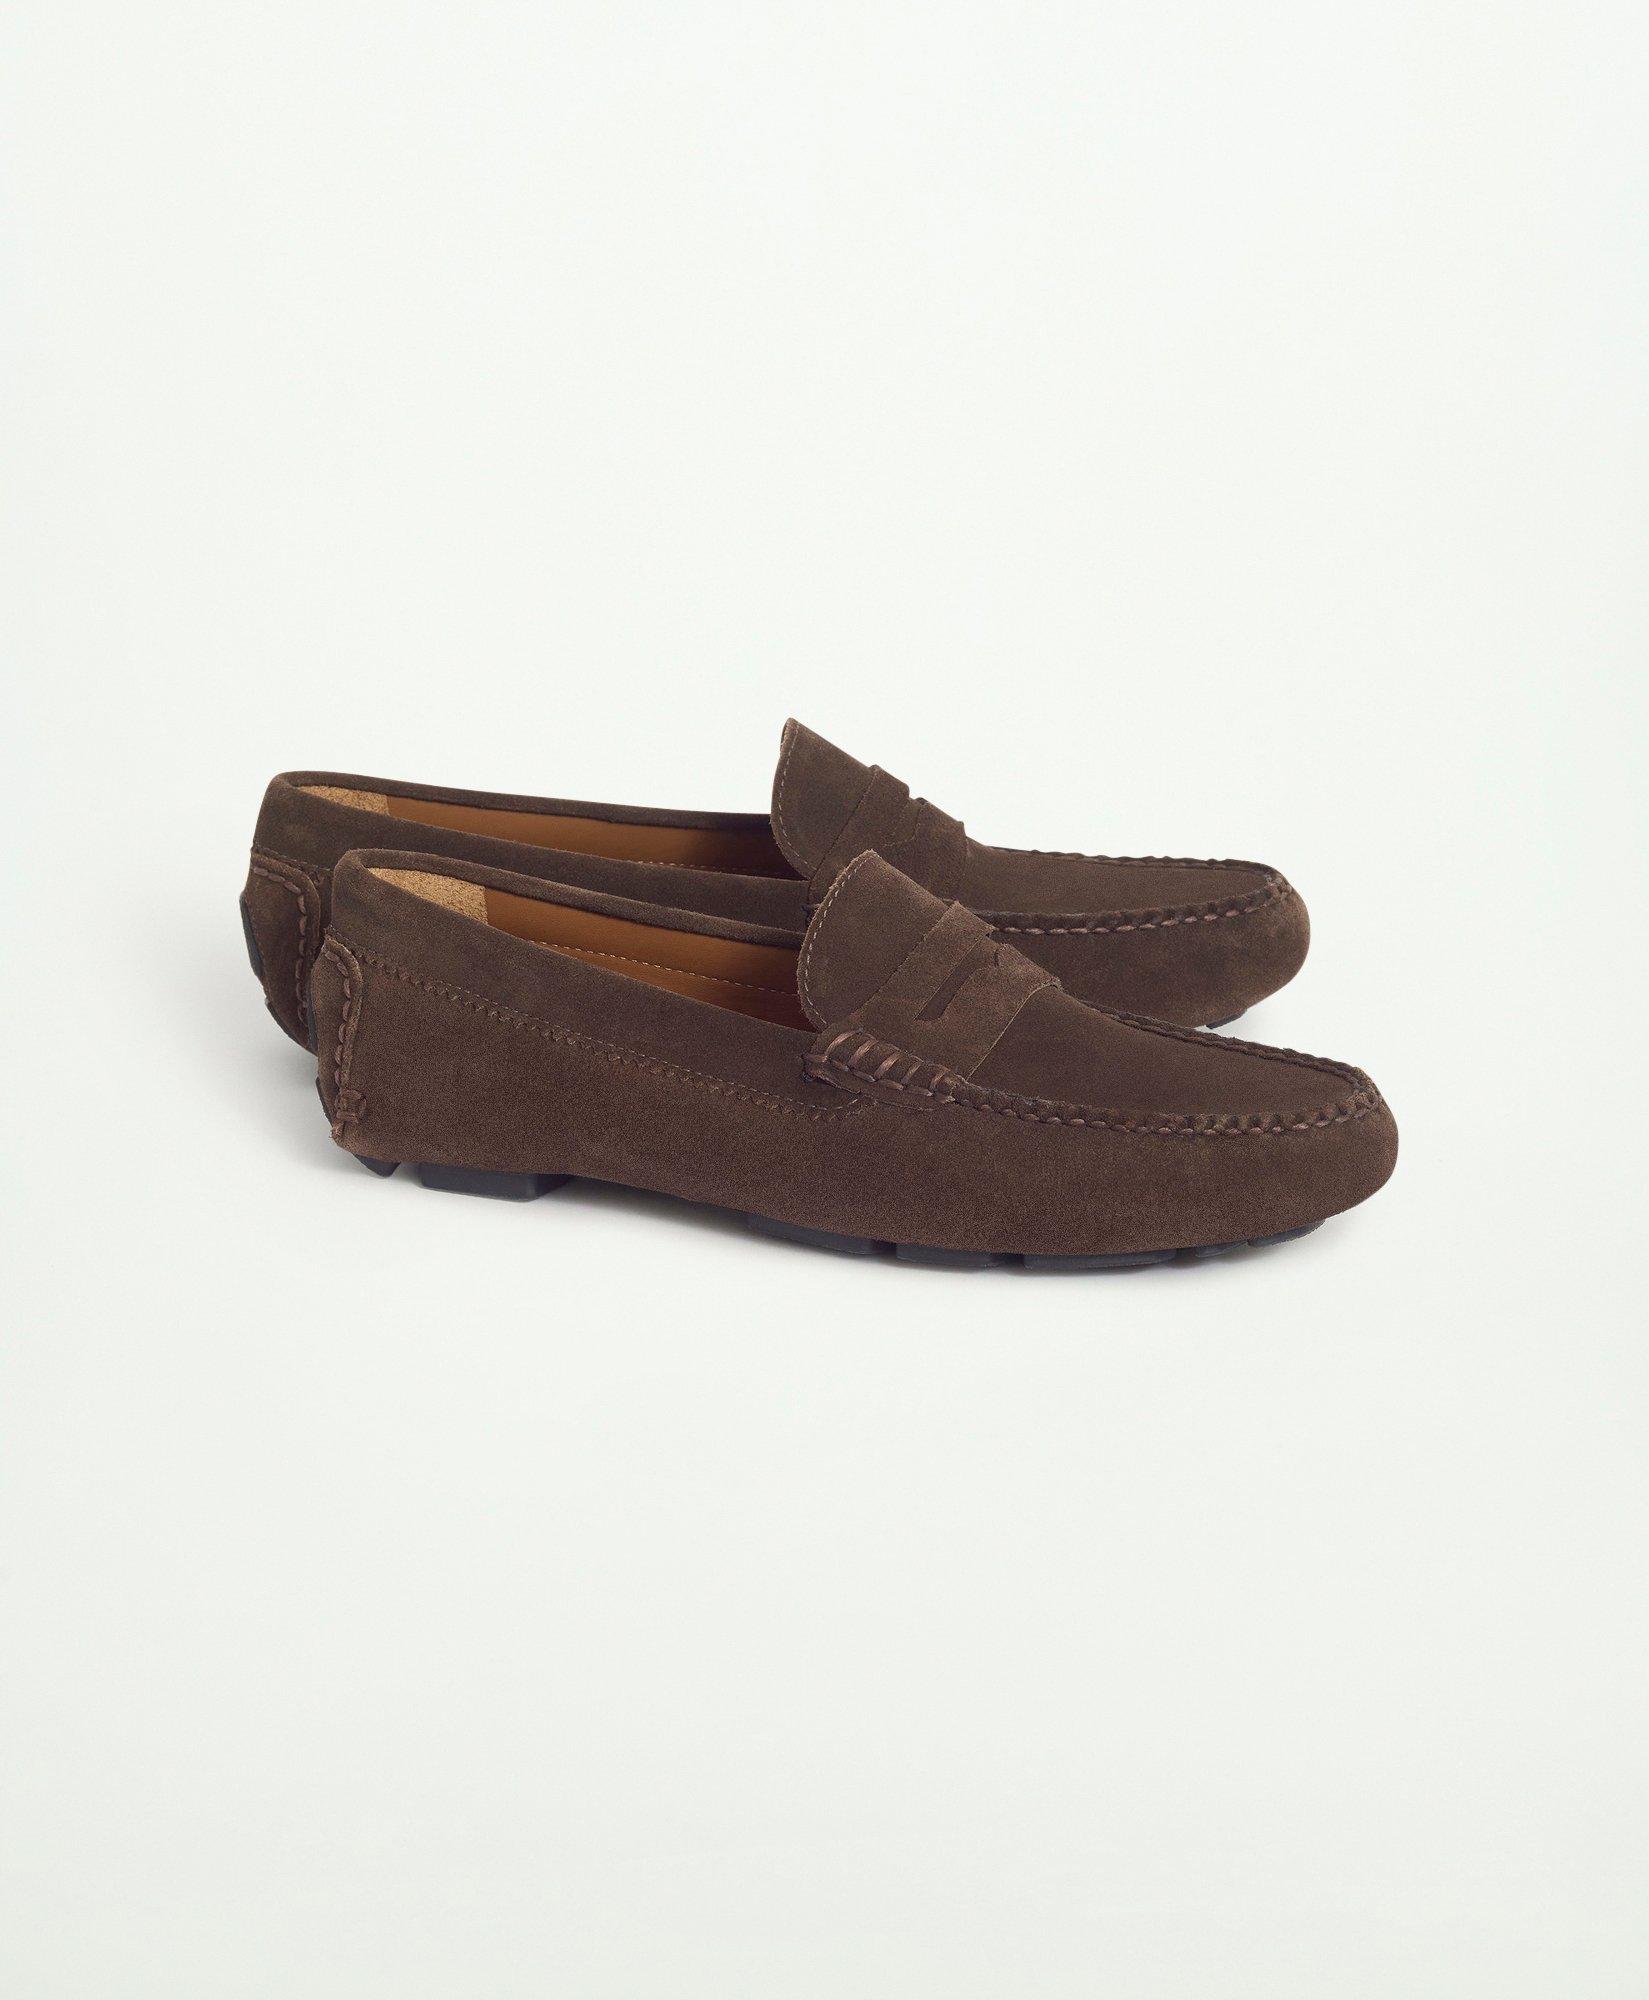 Brooks Brothers Bellport Driving Moc Shoes | Brown | Size 8½ D